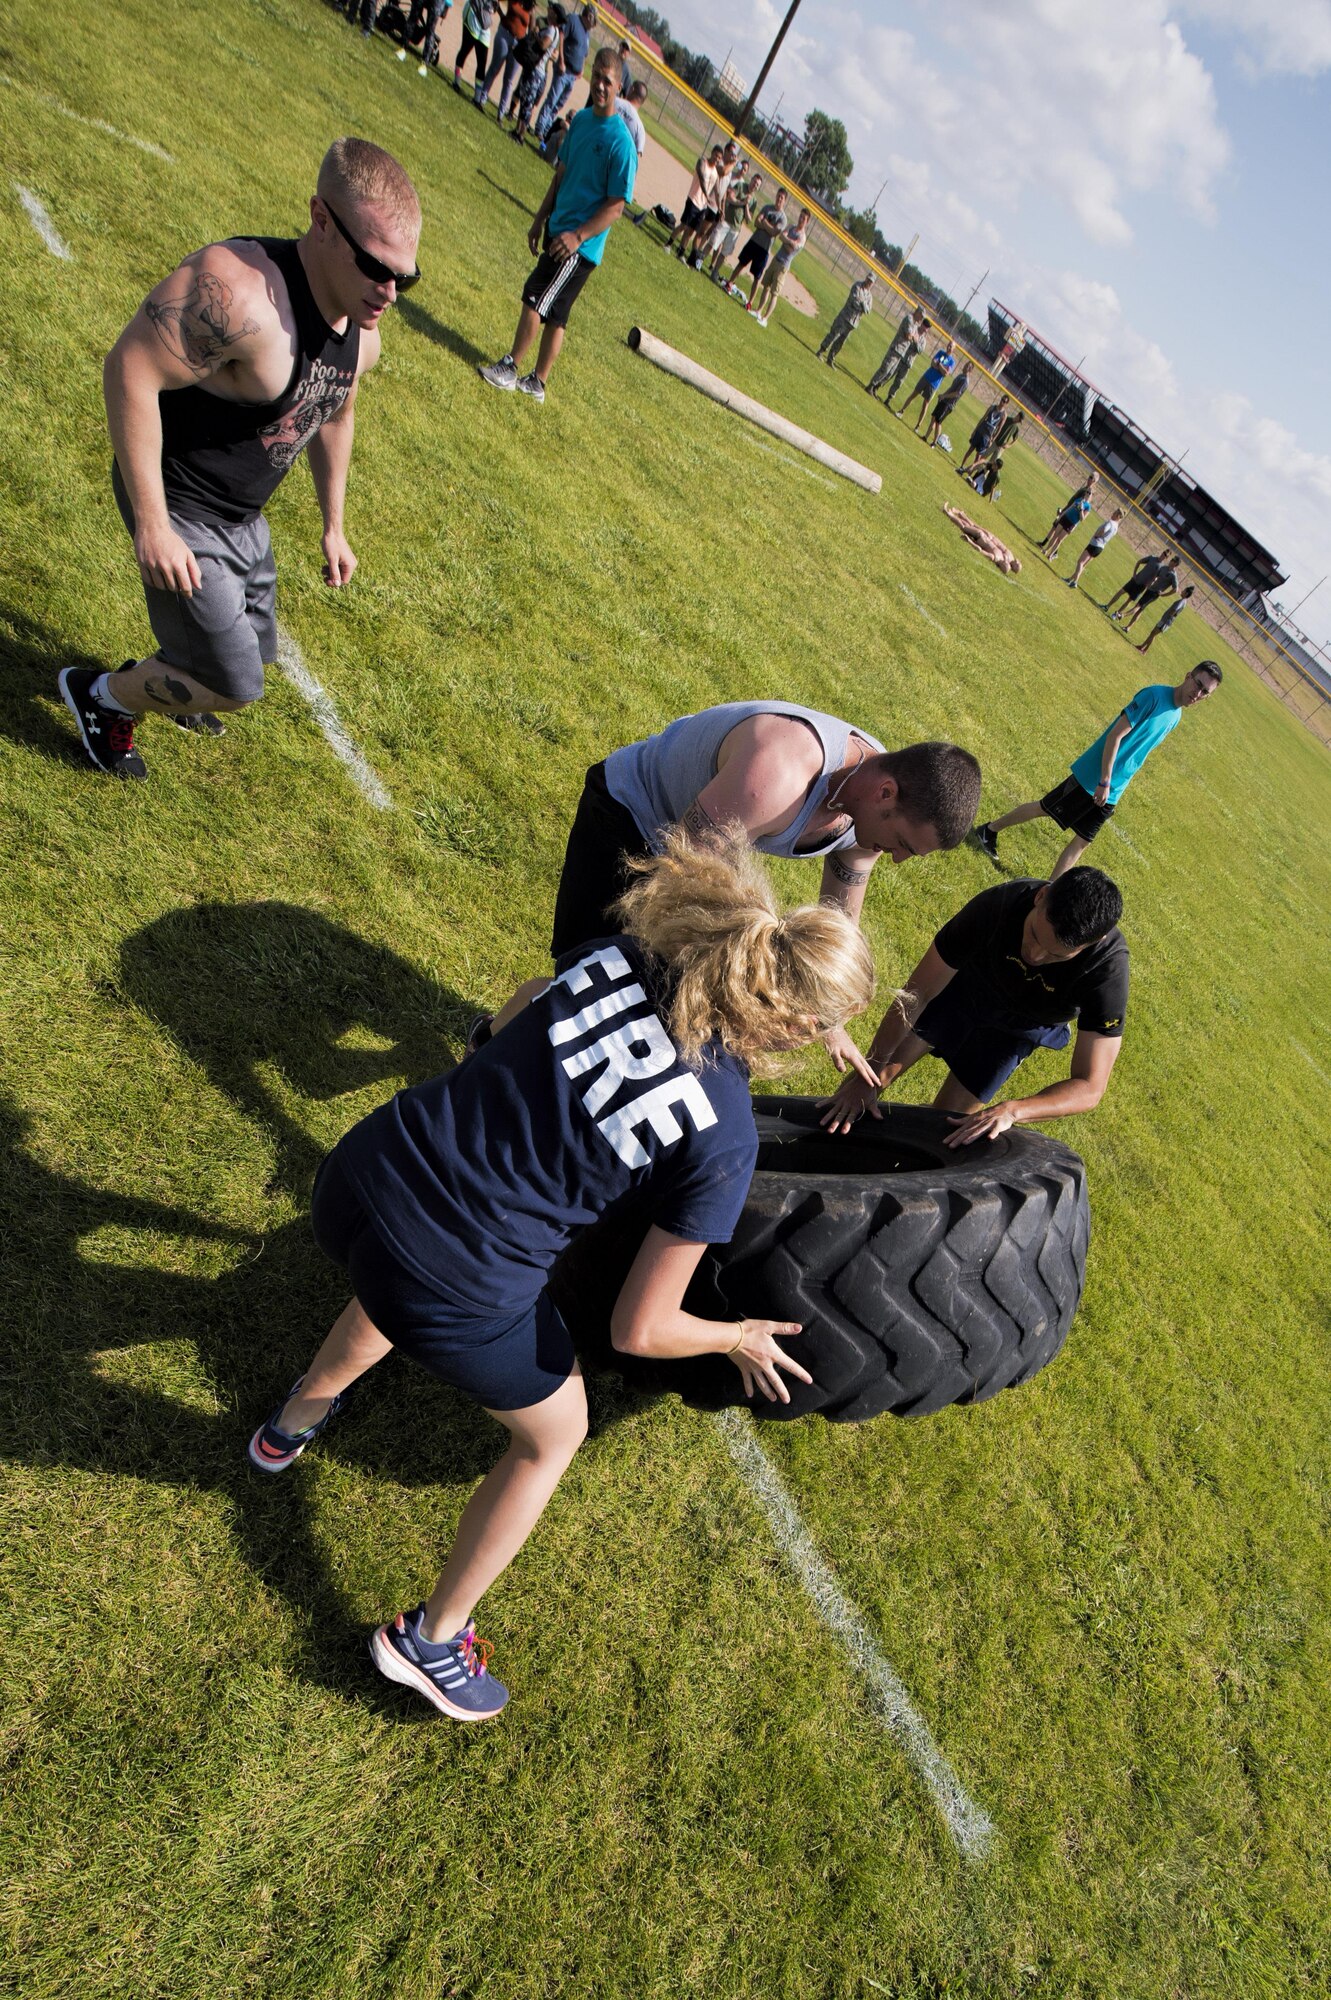 The 90th Civil Engineer Squadron team flips a tire during the annual Frontiercade team-endurance competition at F.E. Warren Air Force Base, Wyo., Aug. 19, 2016. Frontiercade is an event held yearly on base to promote friendly competition amongst the units of 90th Missile Wing. (U.S. Air Force photo by Staff Sgt. Christopher Ruano)